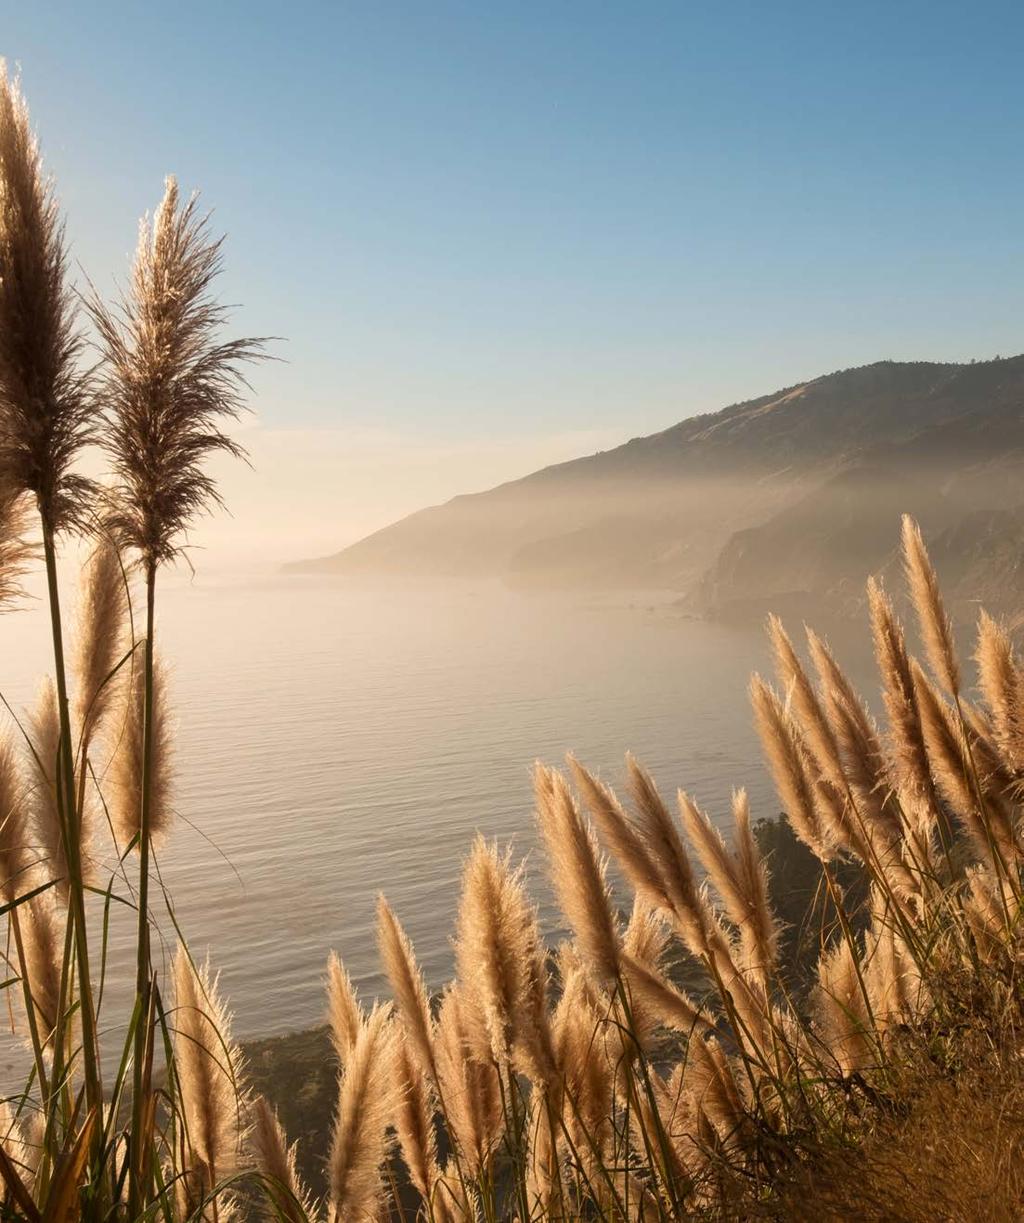 BIG SUR A PLACE UNLIKE ANY OTHER Located at the intersection of the Pacific Ocean and the Santa Lucia Mountains, Big Sur is equal parts American legend and natural wonder, one of the most scenic